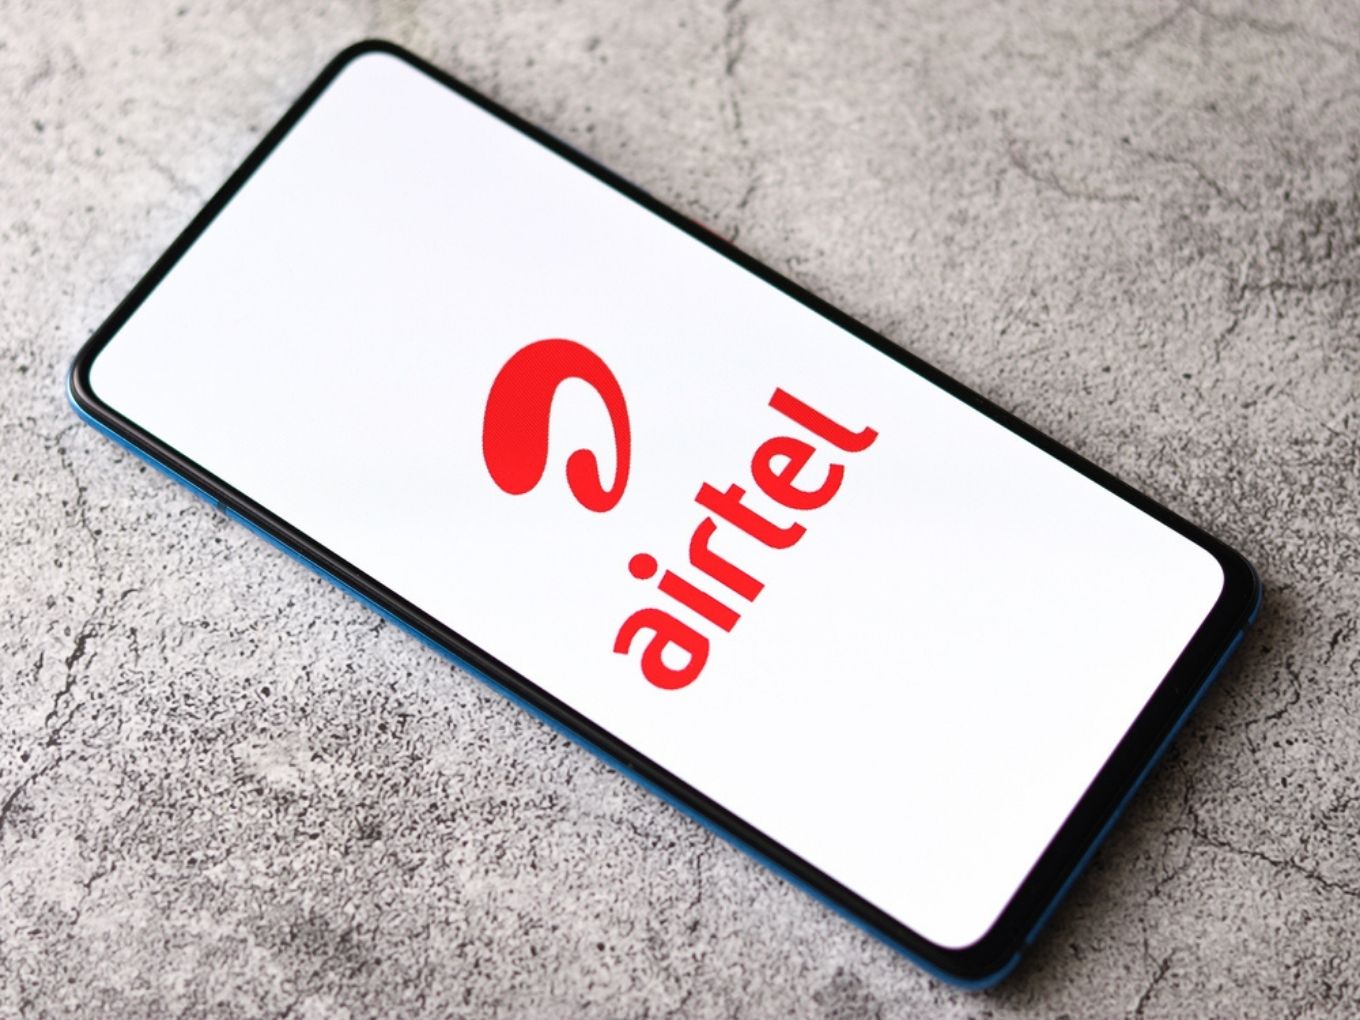 Airtel Pips Jio With Live 5G Network Tests In Hyderabad